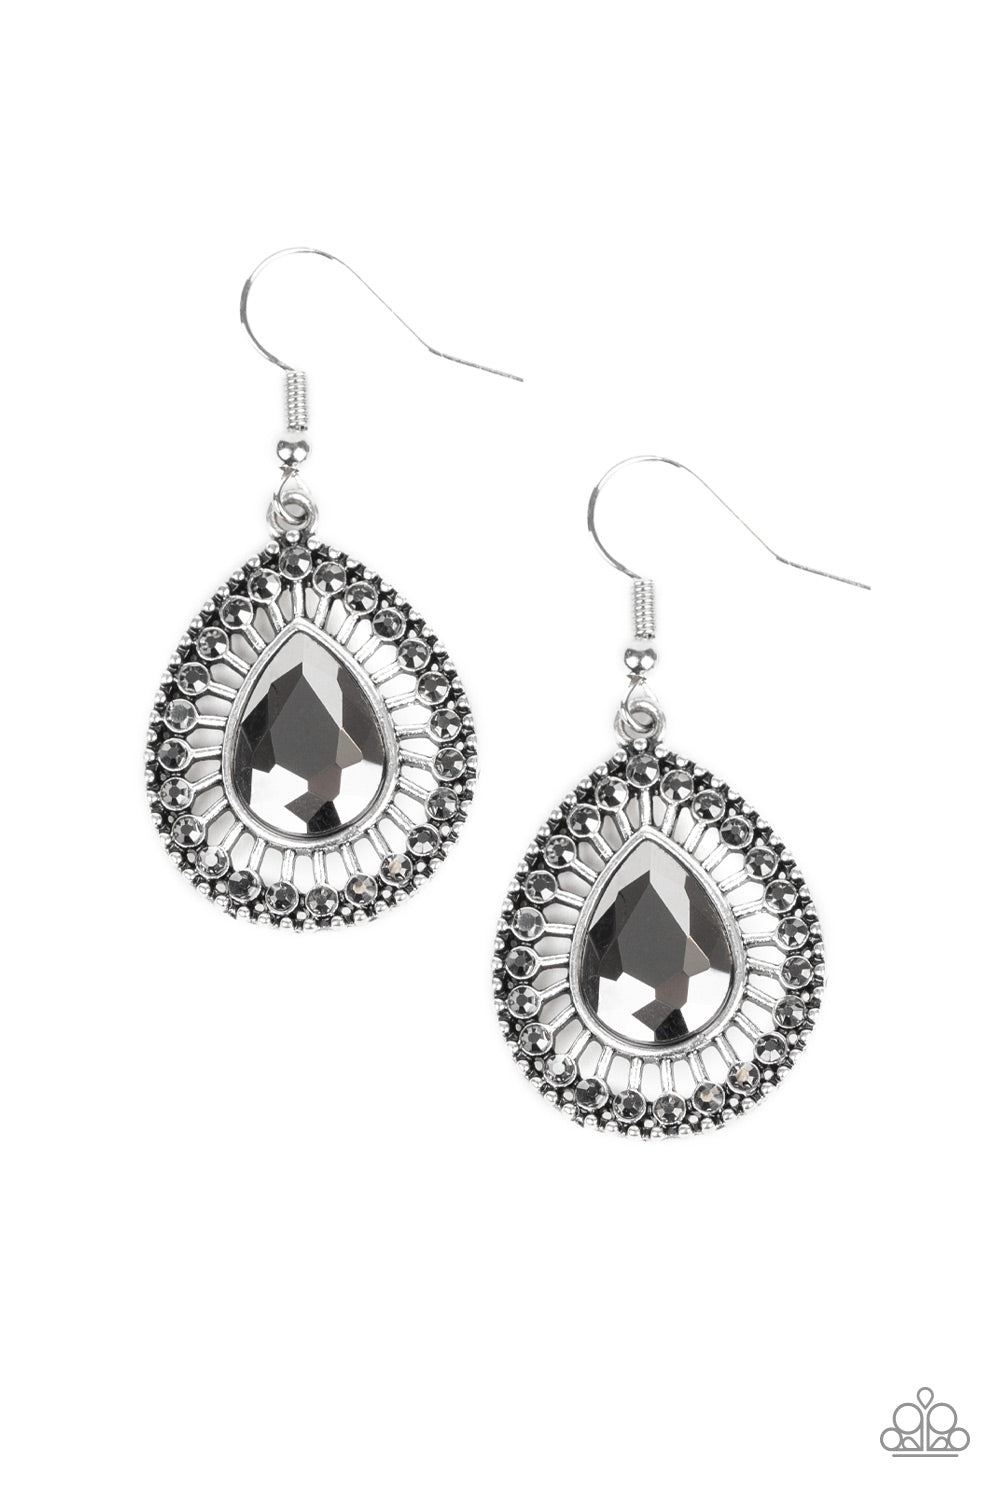 Limo Service - Silver Earring - TheMasterCollection